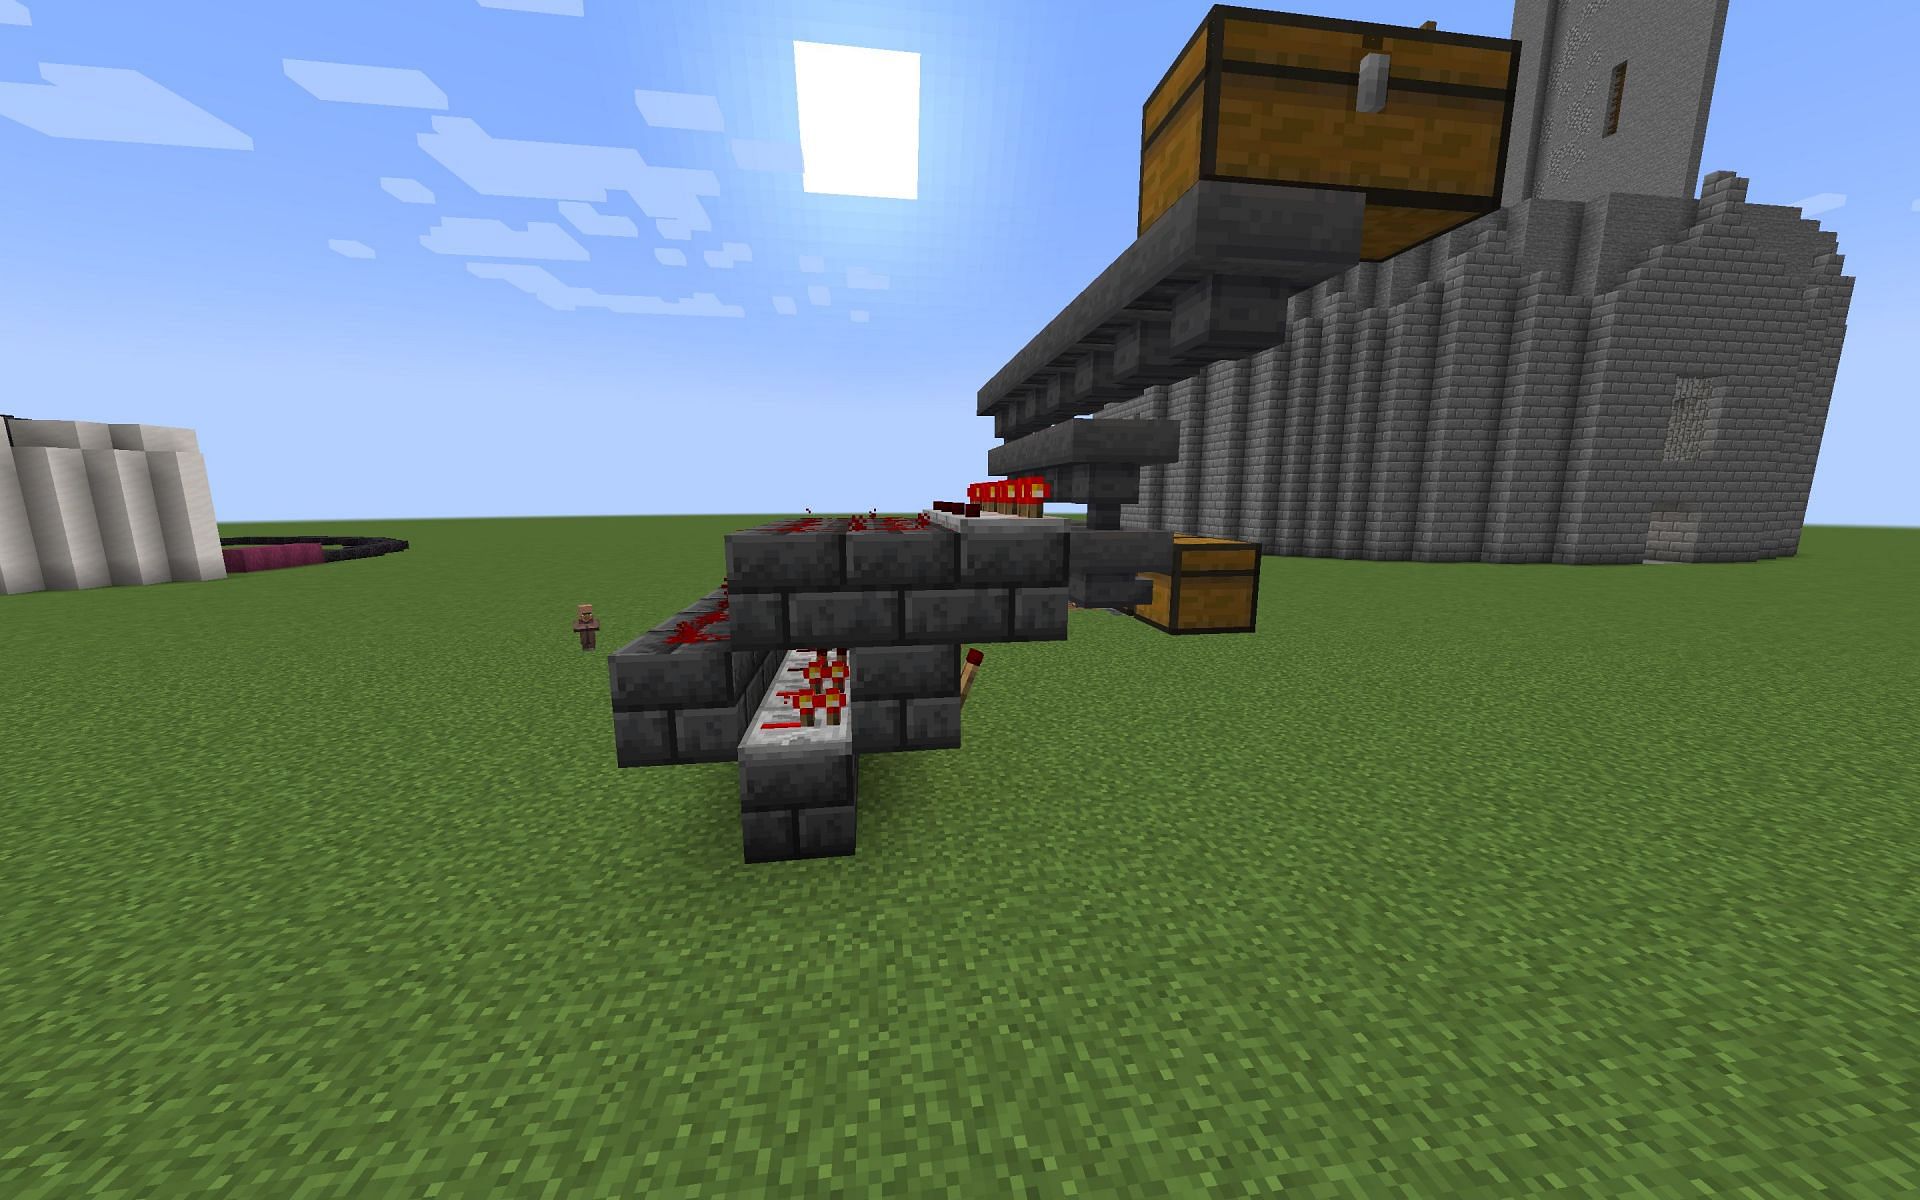 Automatic Sorting System (Image via Minecraft Forum)